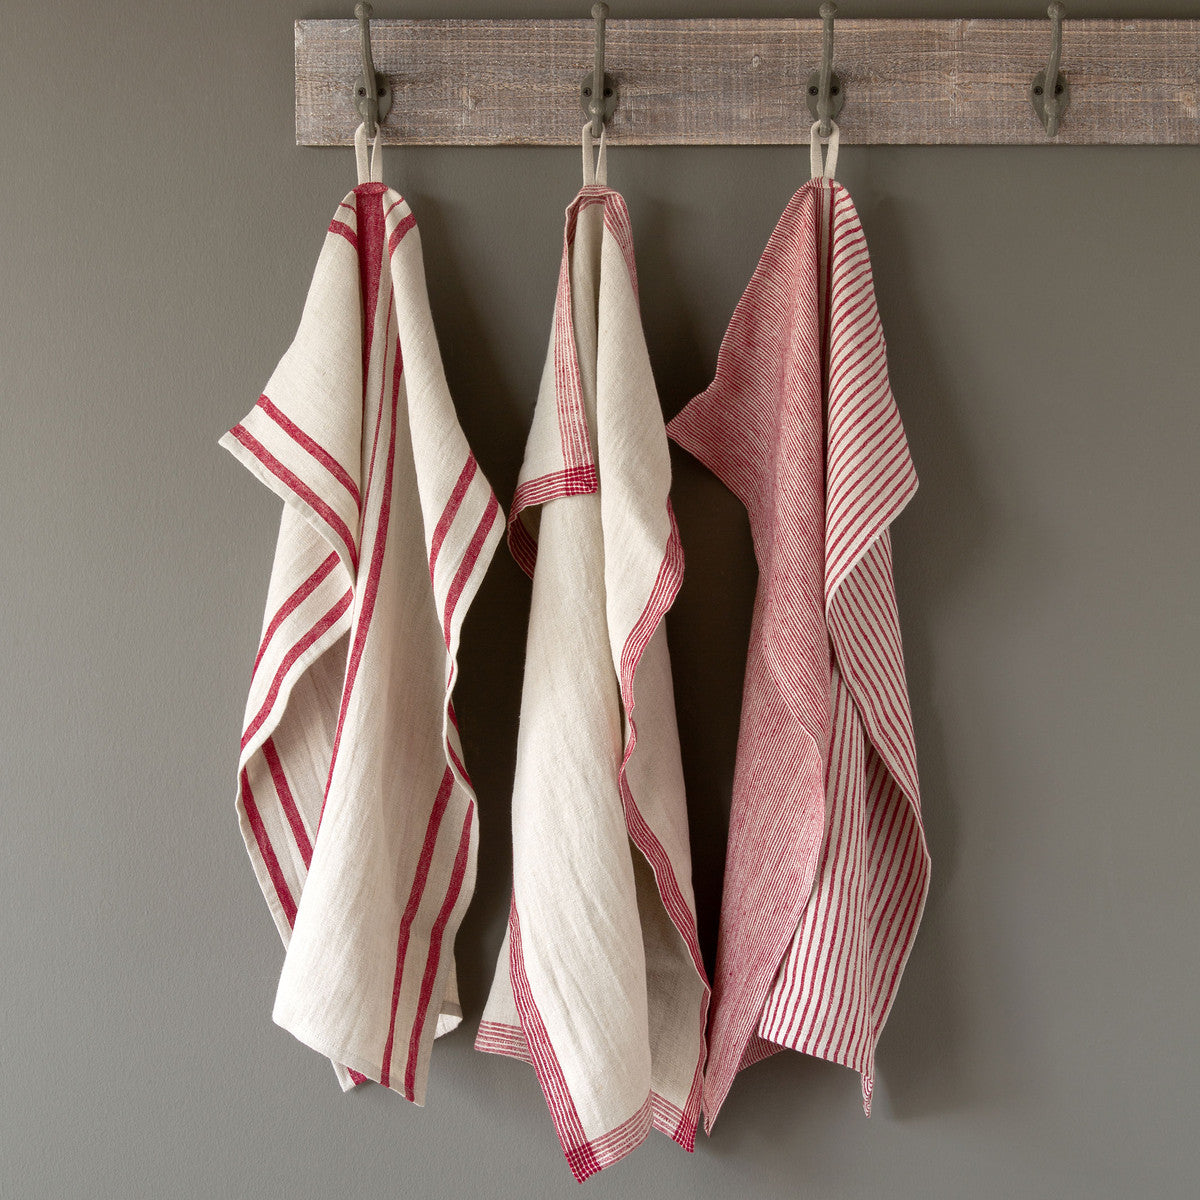 Artisanal dish towels, pillows, and linen tape woven by Stephanie Seal Brown